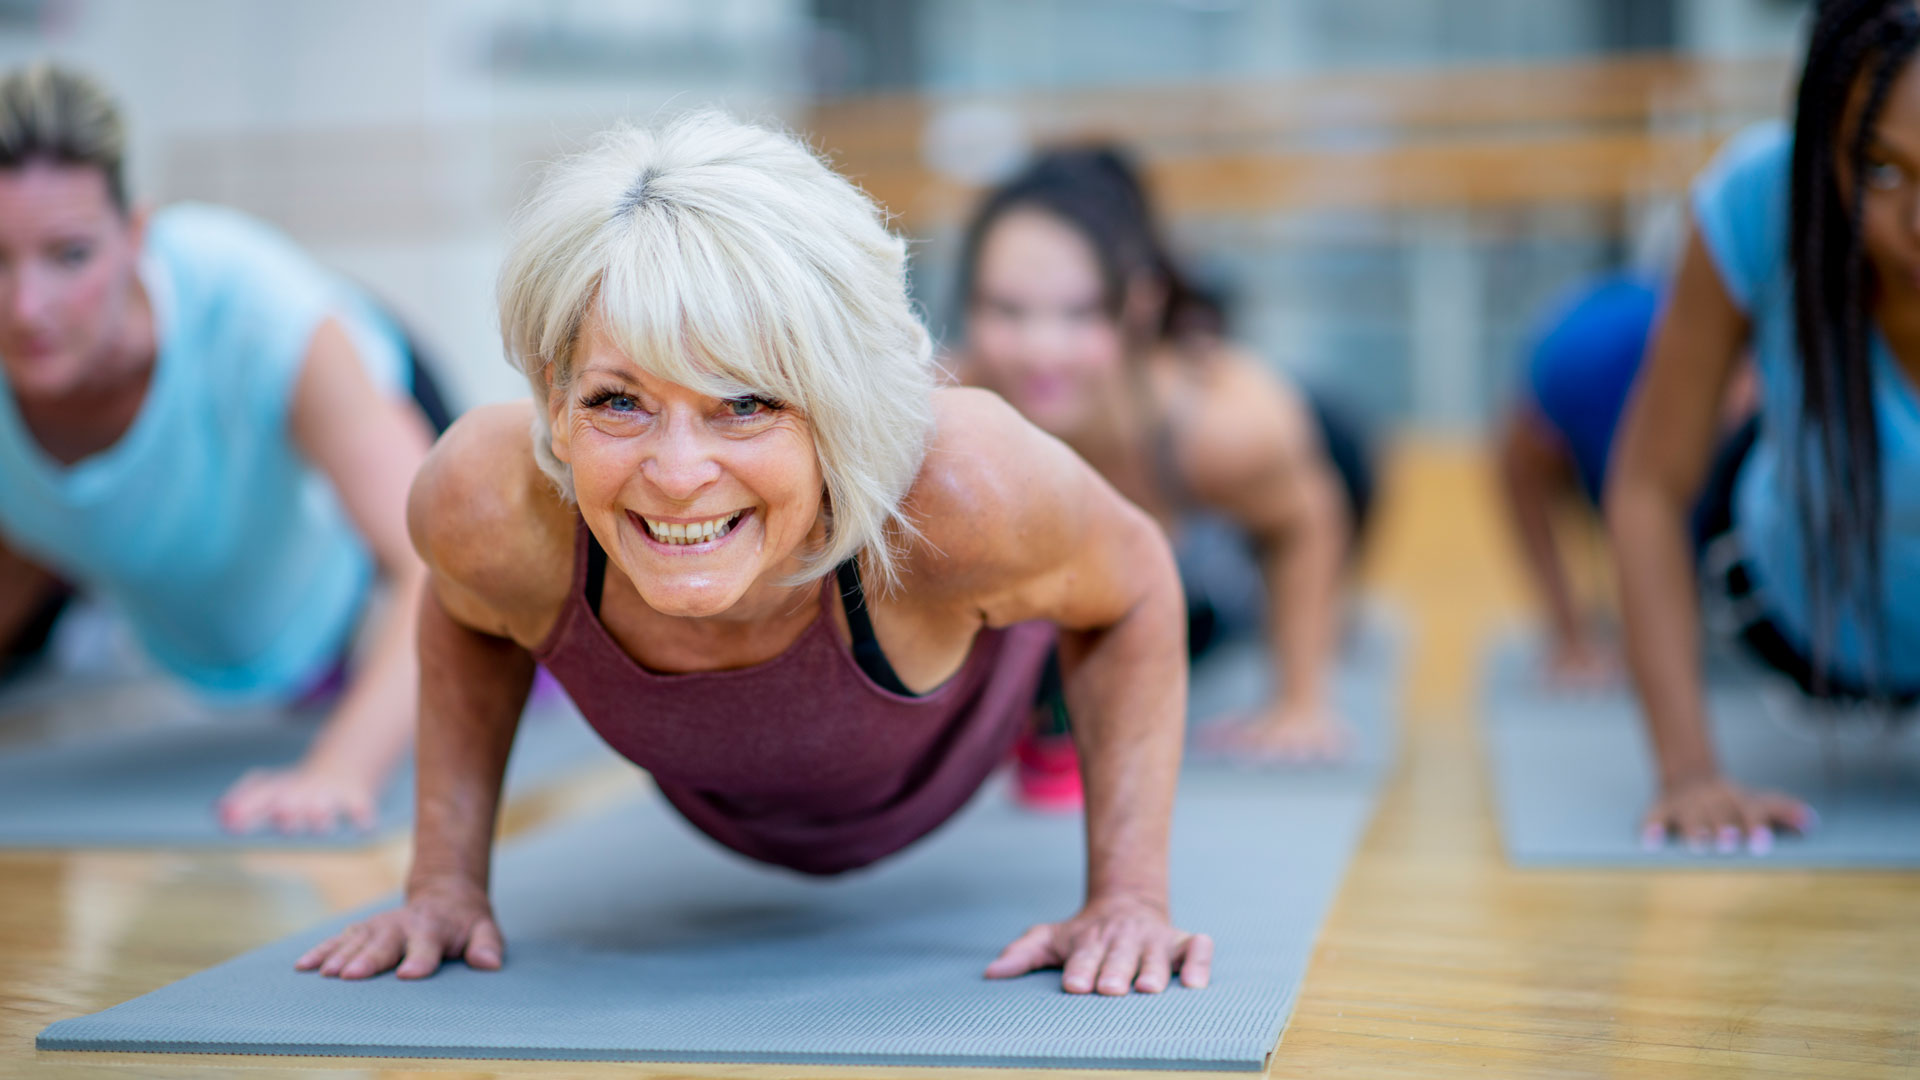 Benefits of exercise over 50